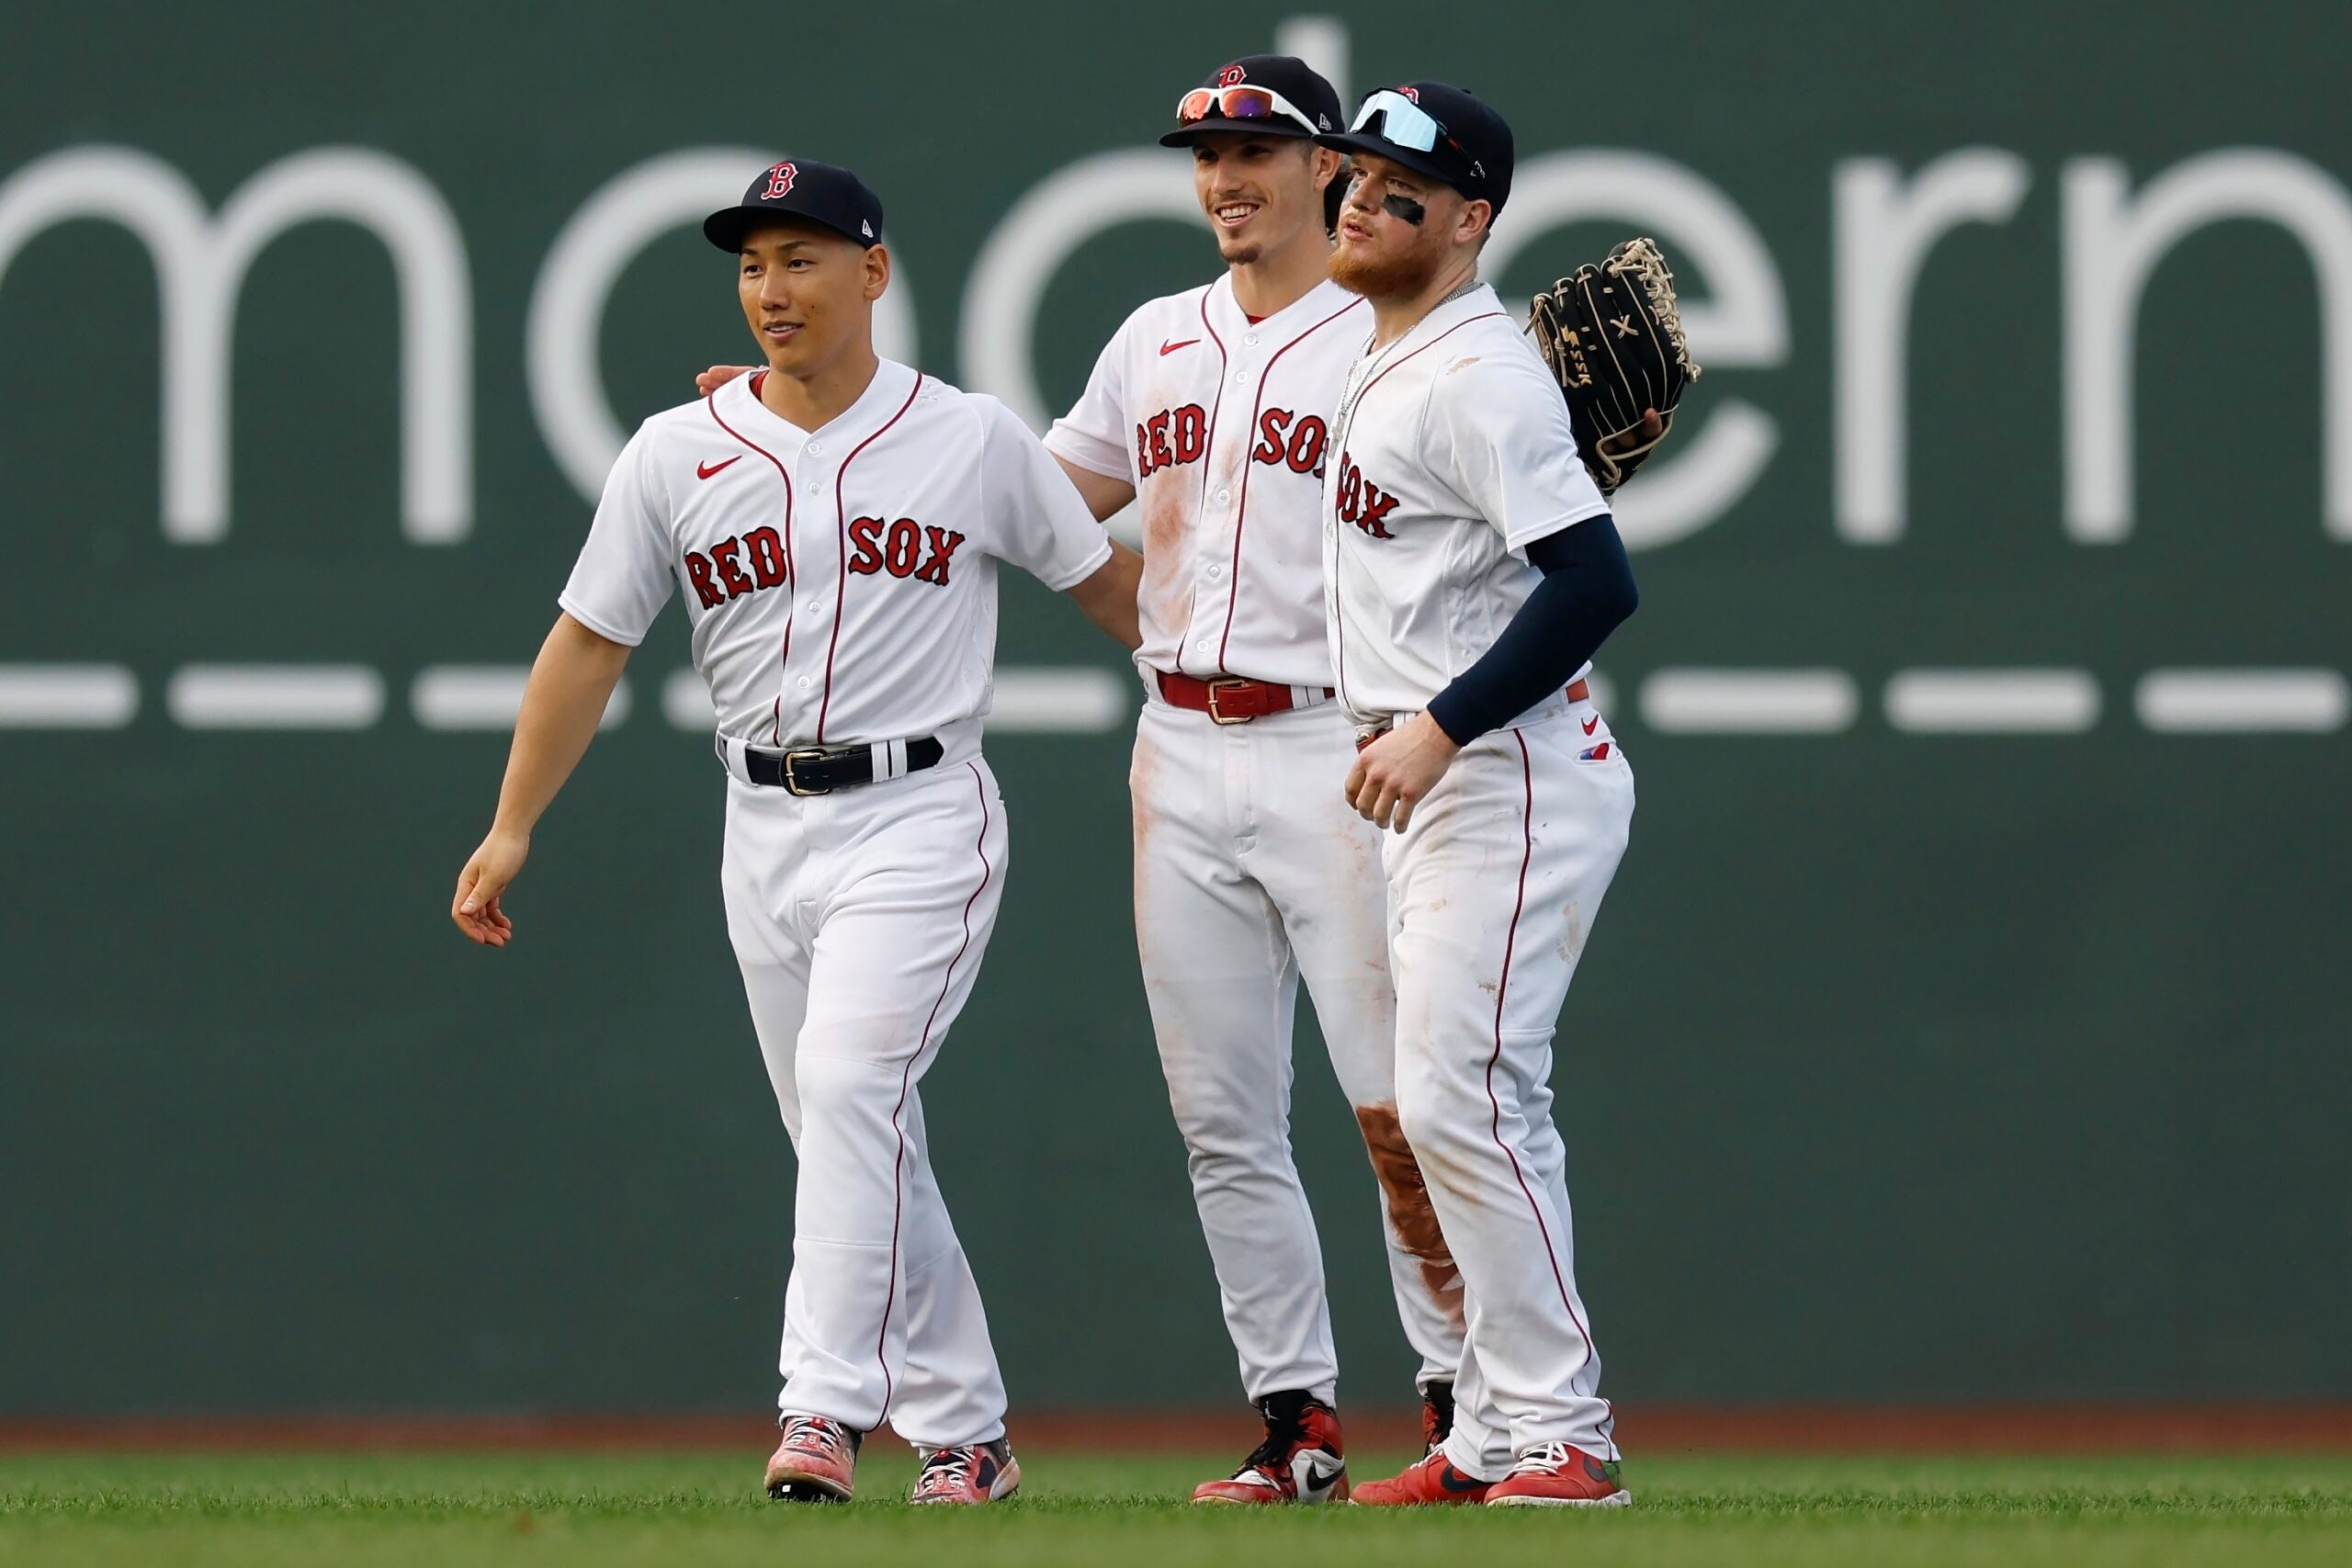 What have been the Red Sox' top surprises so far this season?